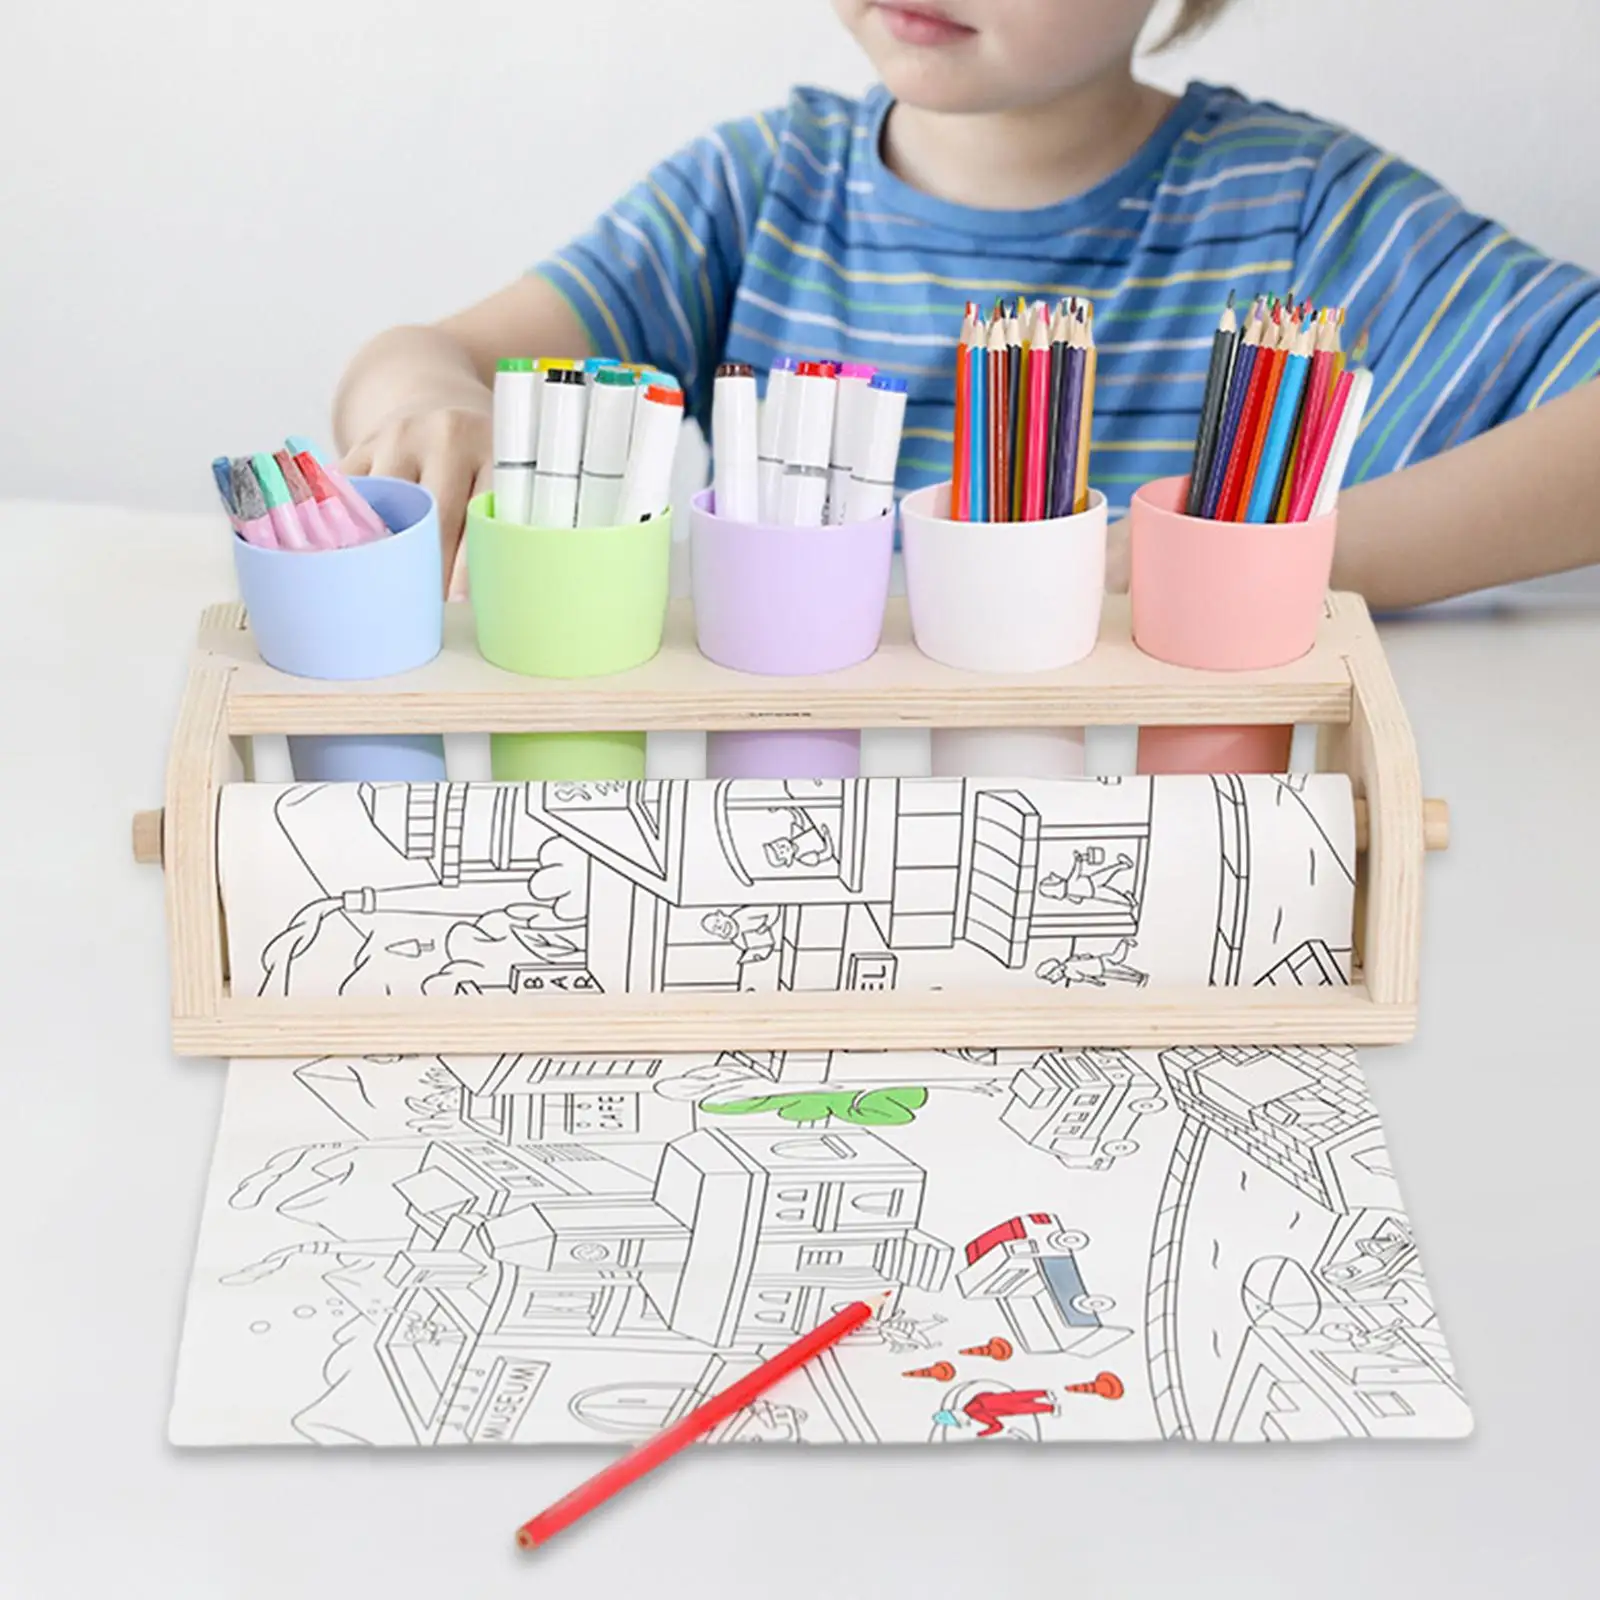 

Desktop Paper Roll Dispenser Supplies Birthday Gifts Painting Easel for Kids Drawing Writing Painting Gift Wrapping Easel Paper